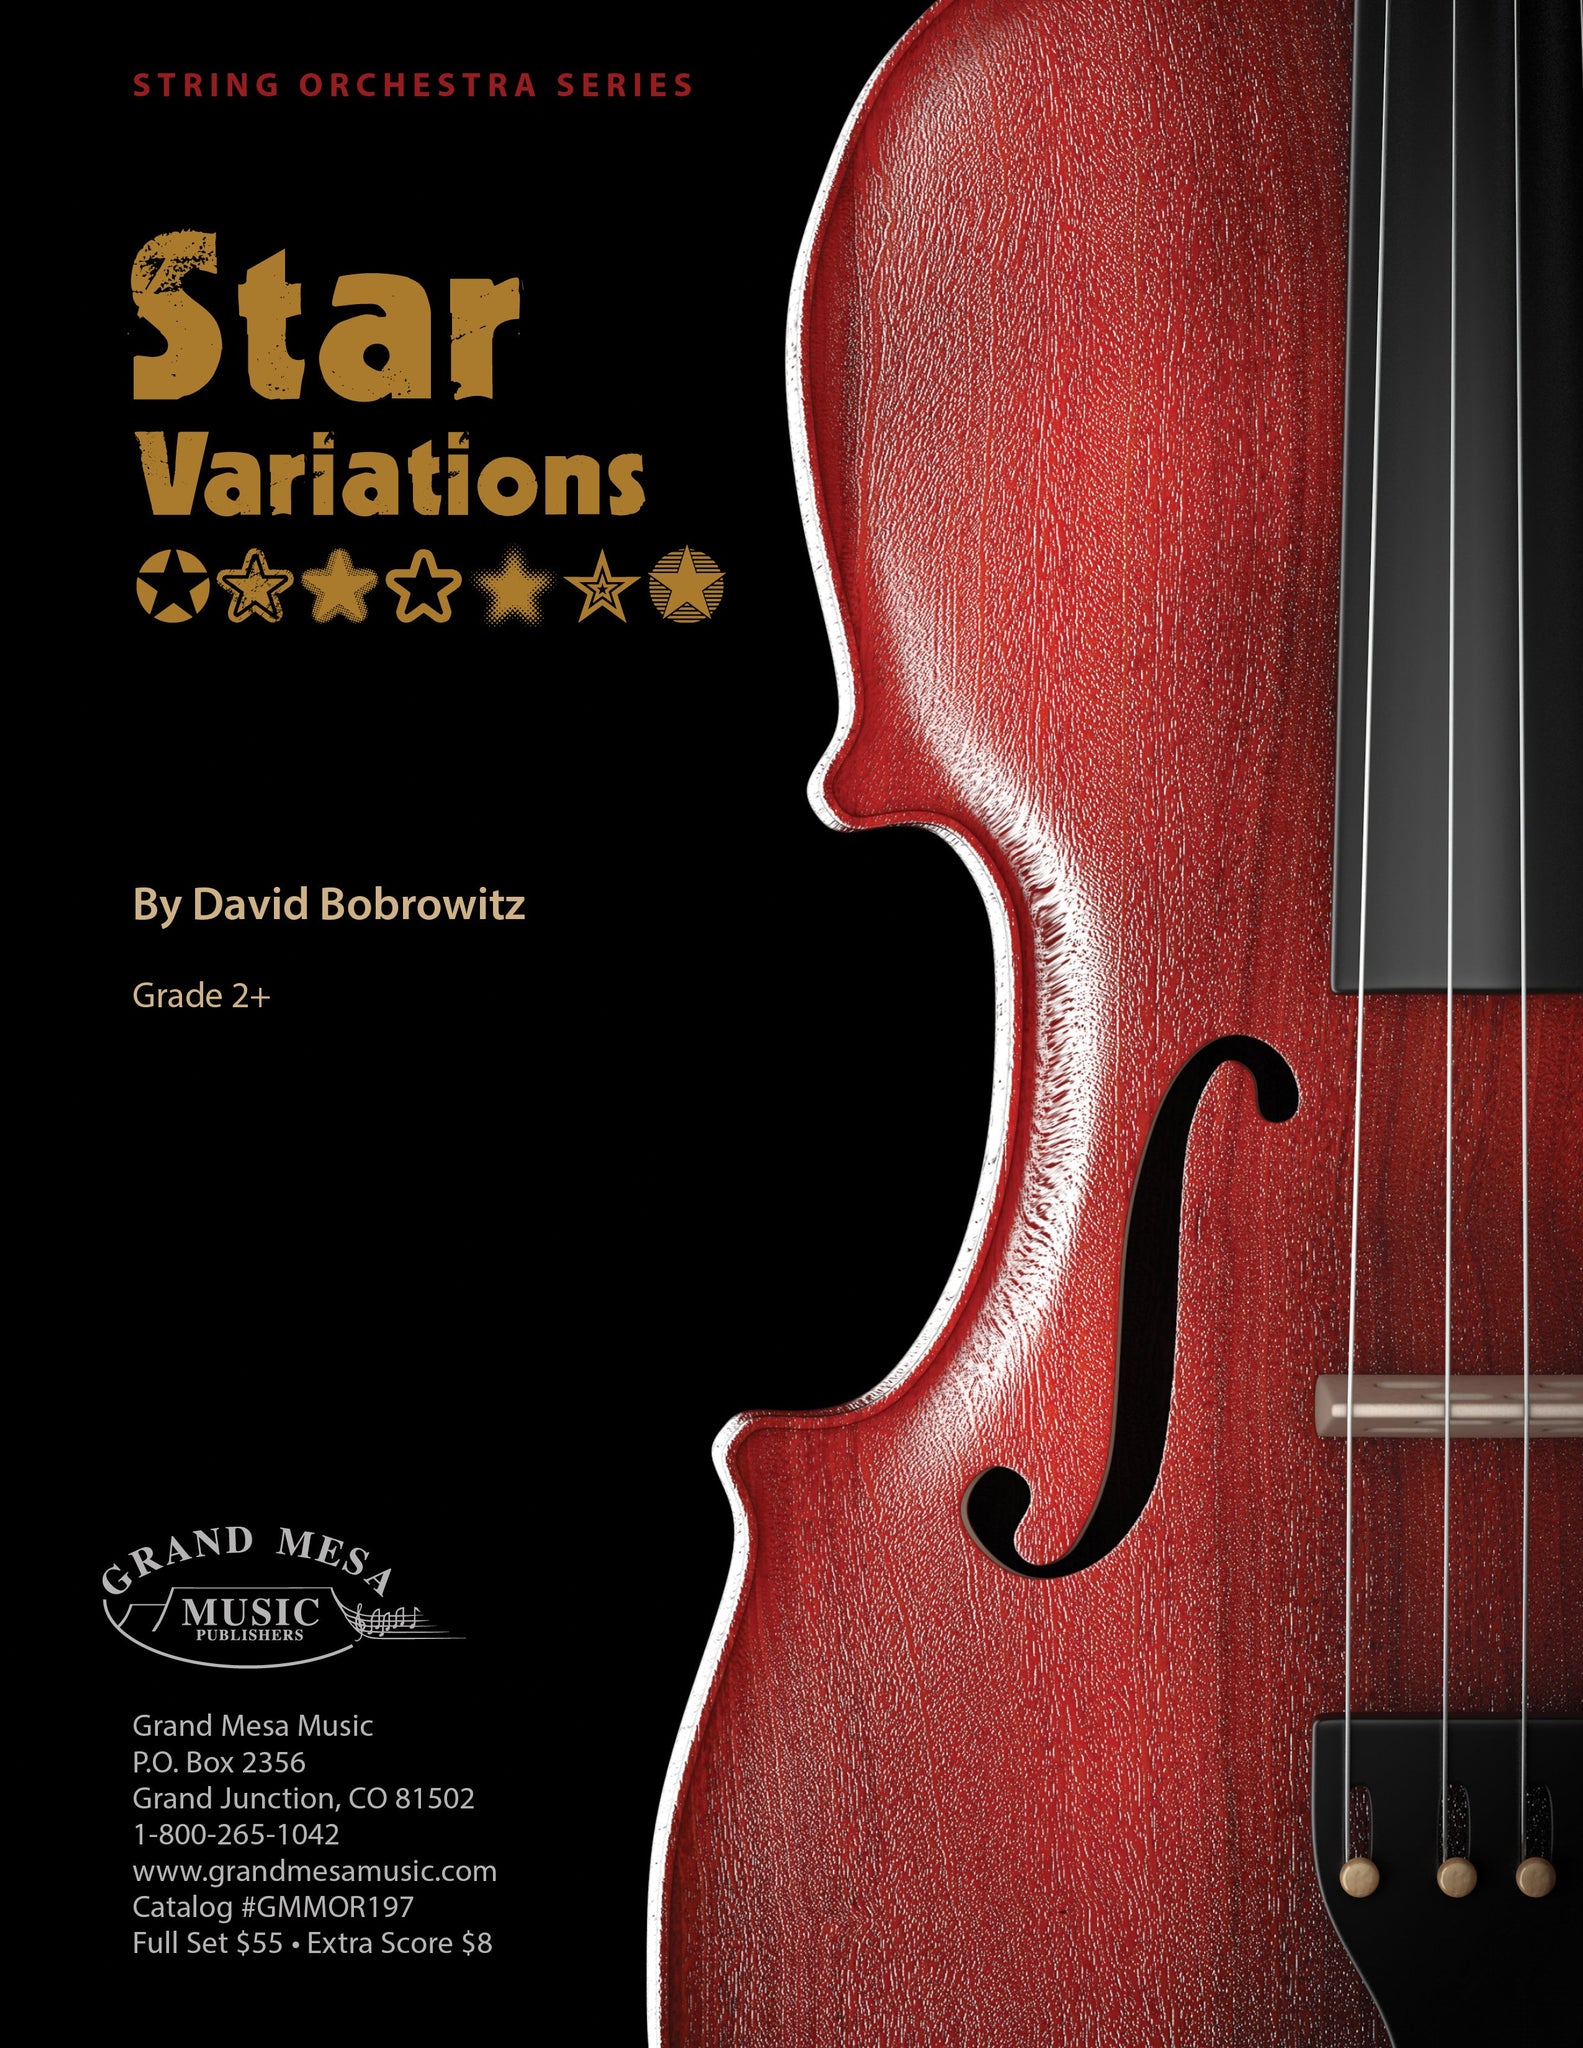 Strings sheet music cover of Star Variations, composed by David Bobrowitz.